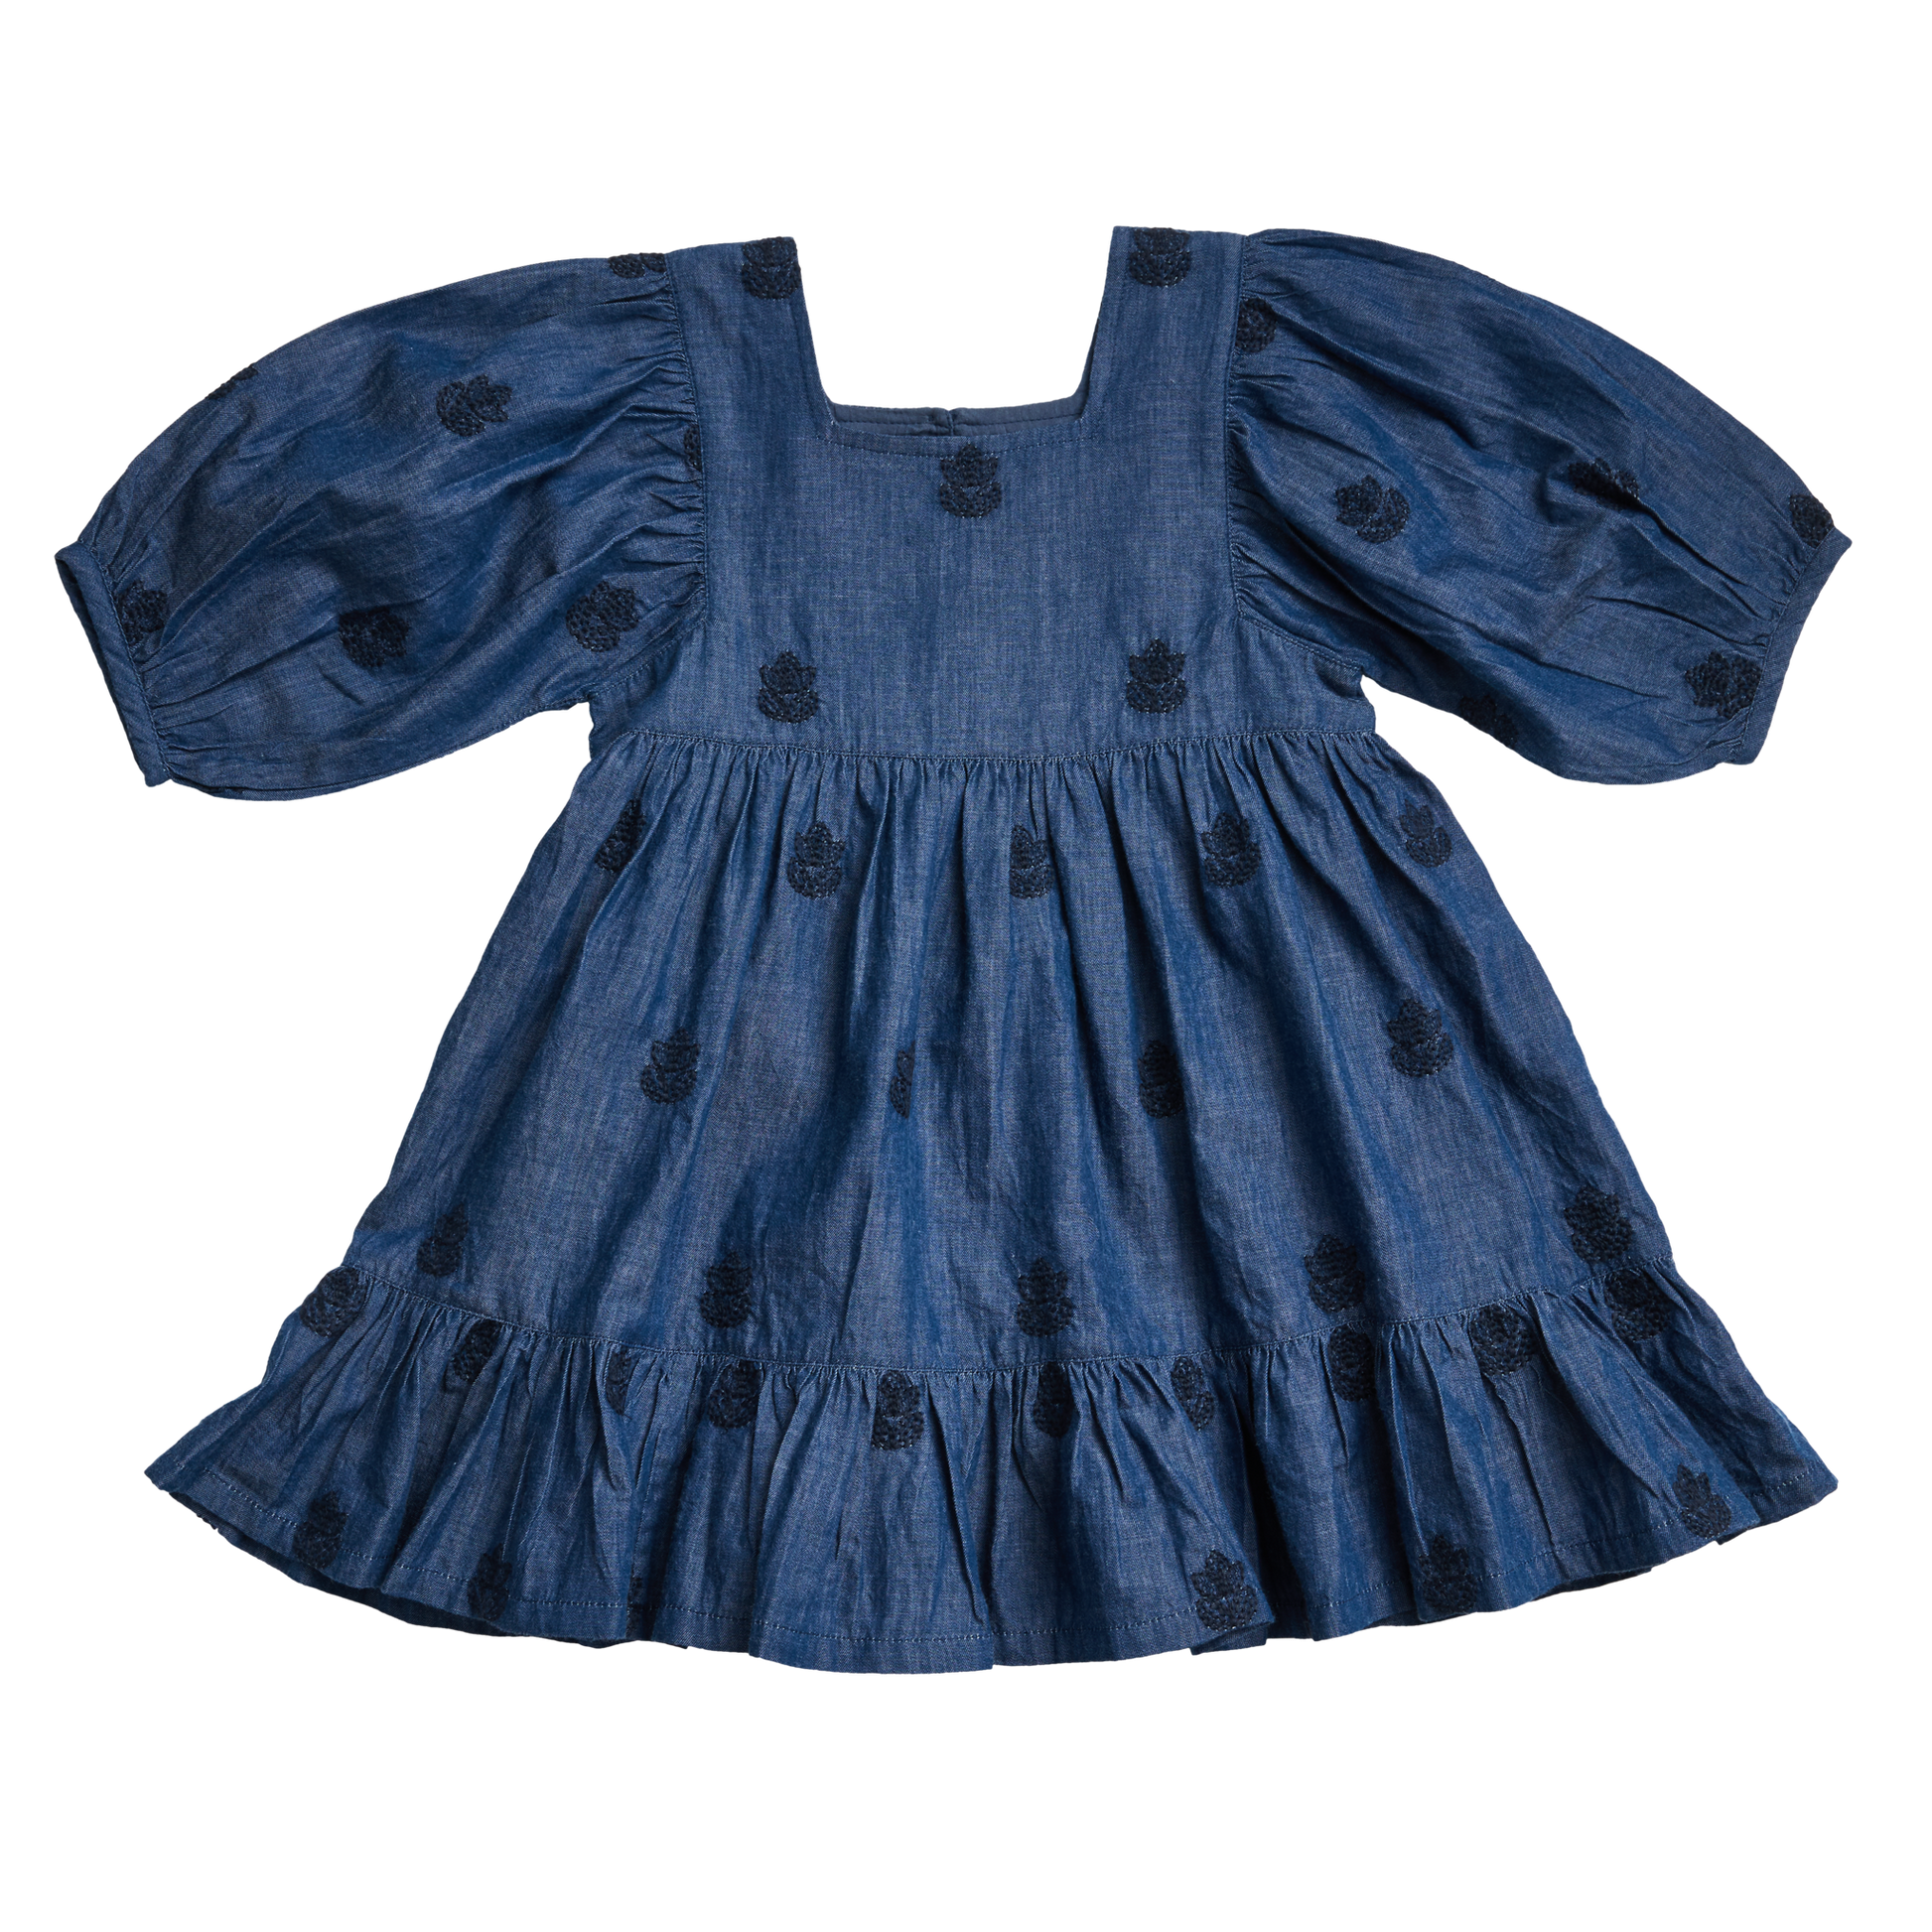 Leena Dress in Chambray with Embroidery  - Doodlebug's Children's Boutique